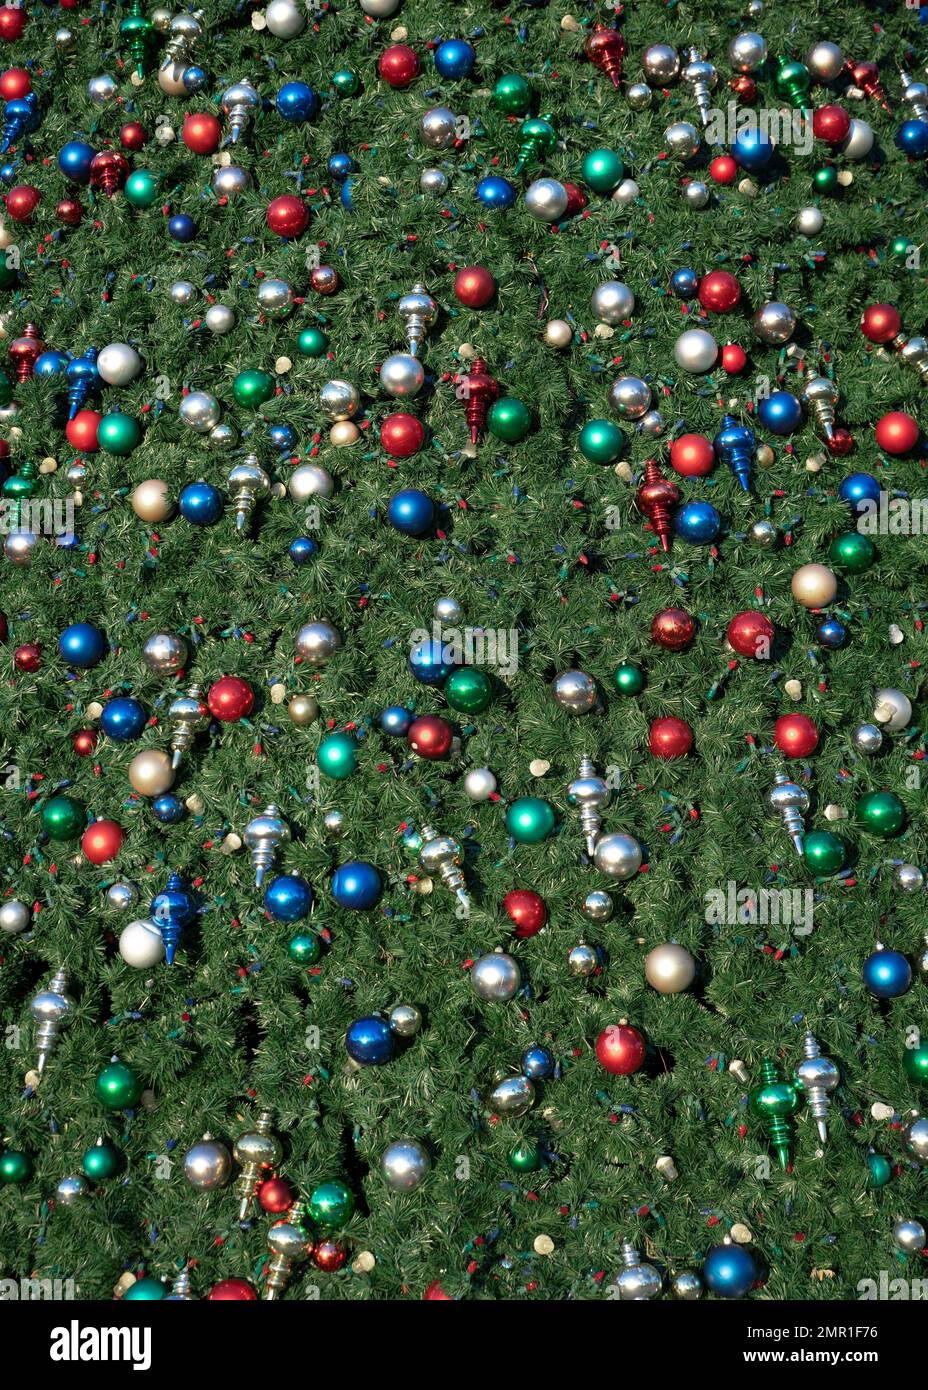 Decorated Christmas tree detail. Stock Photo